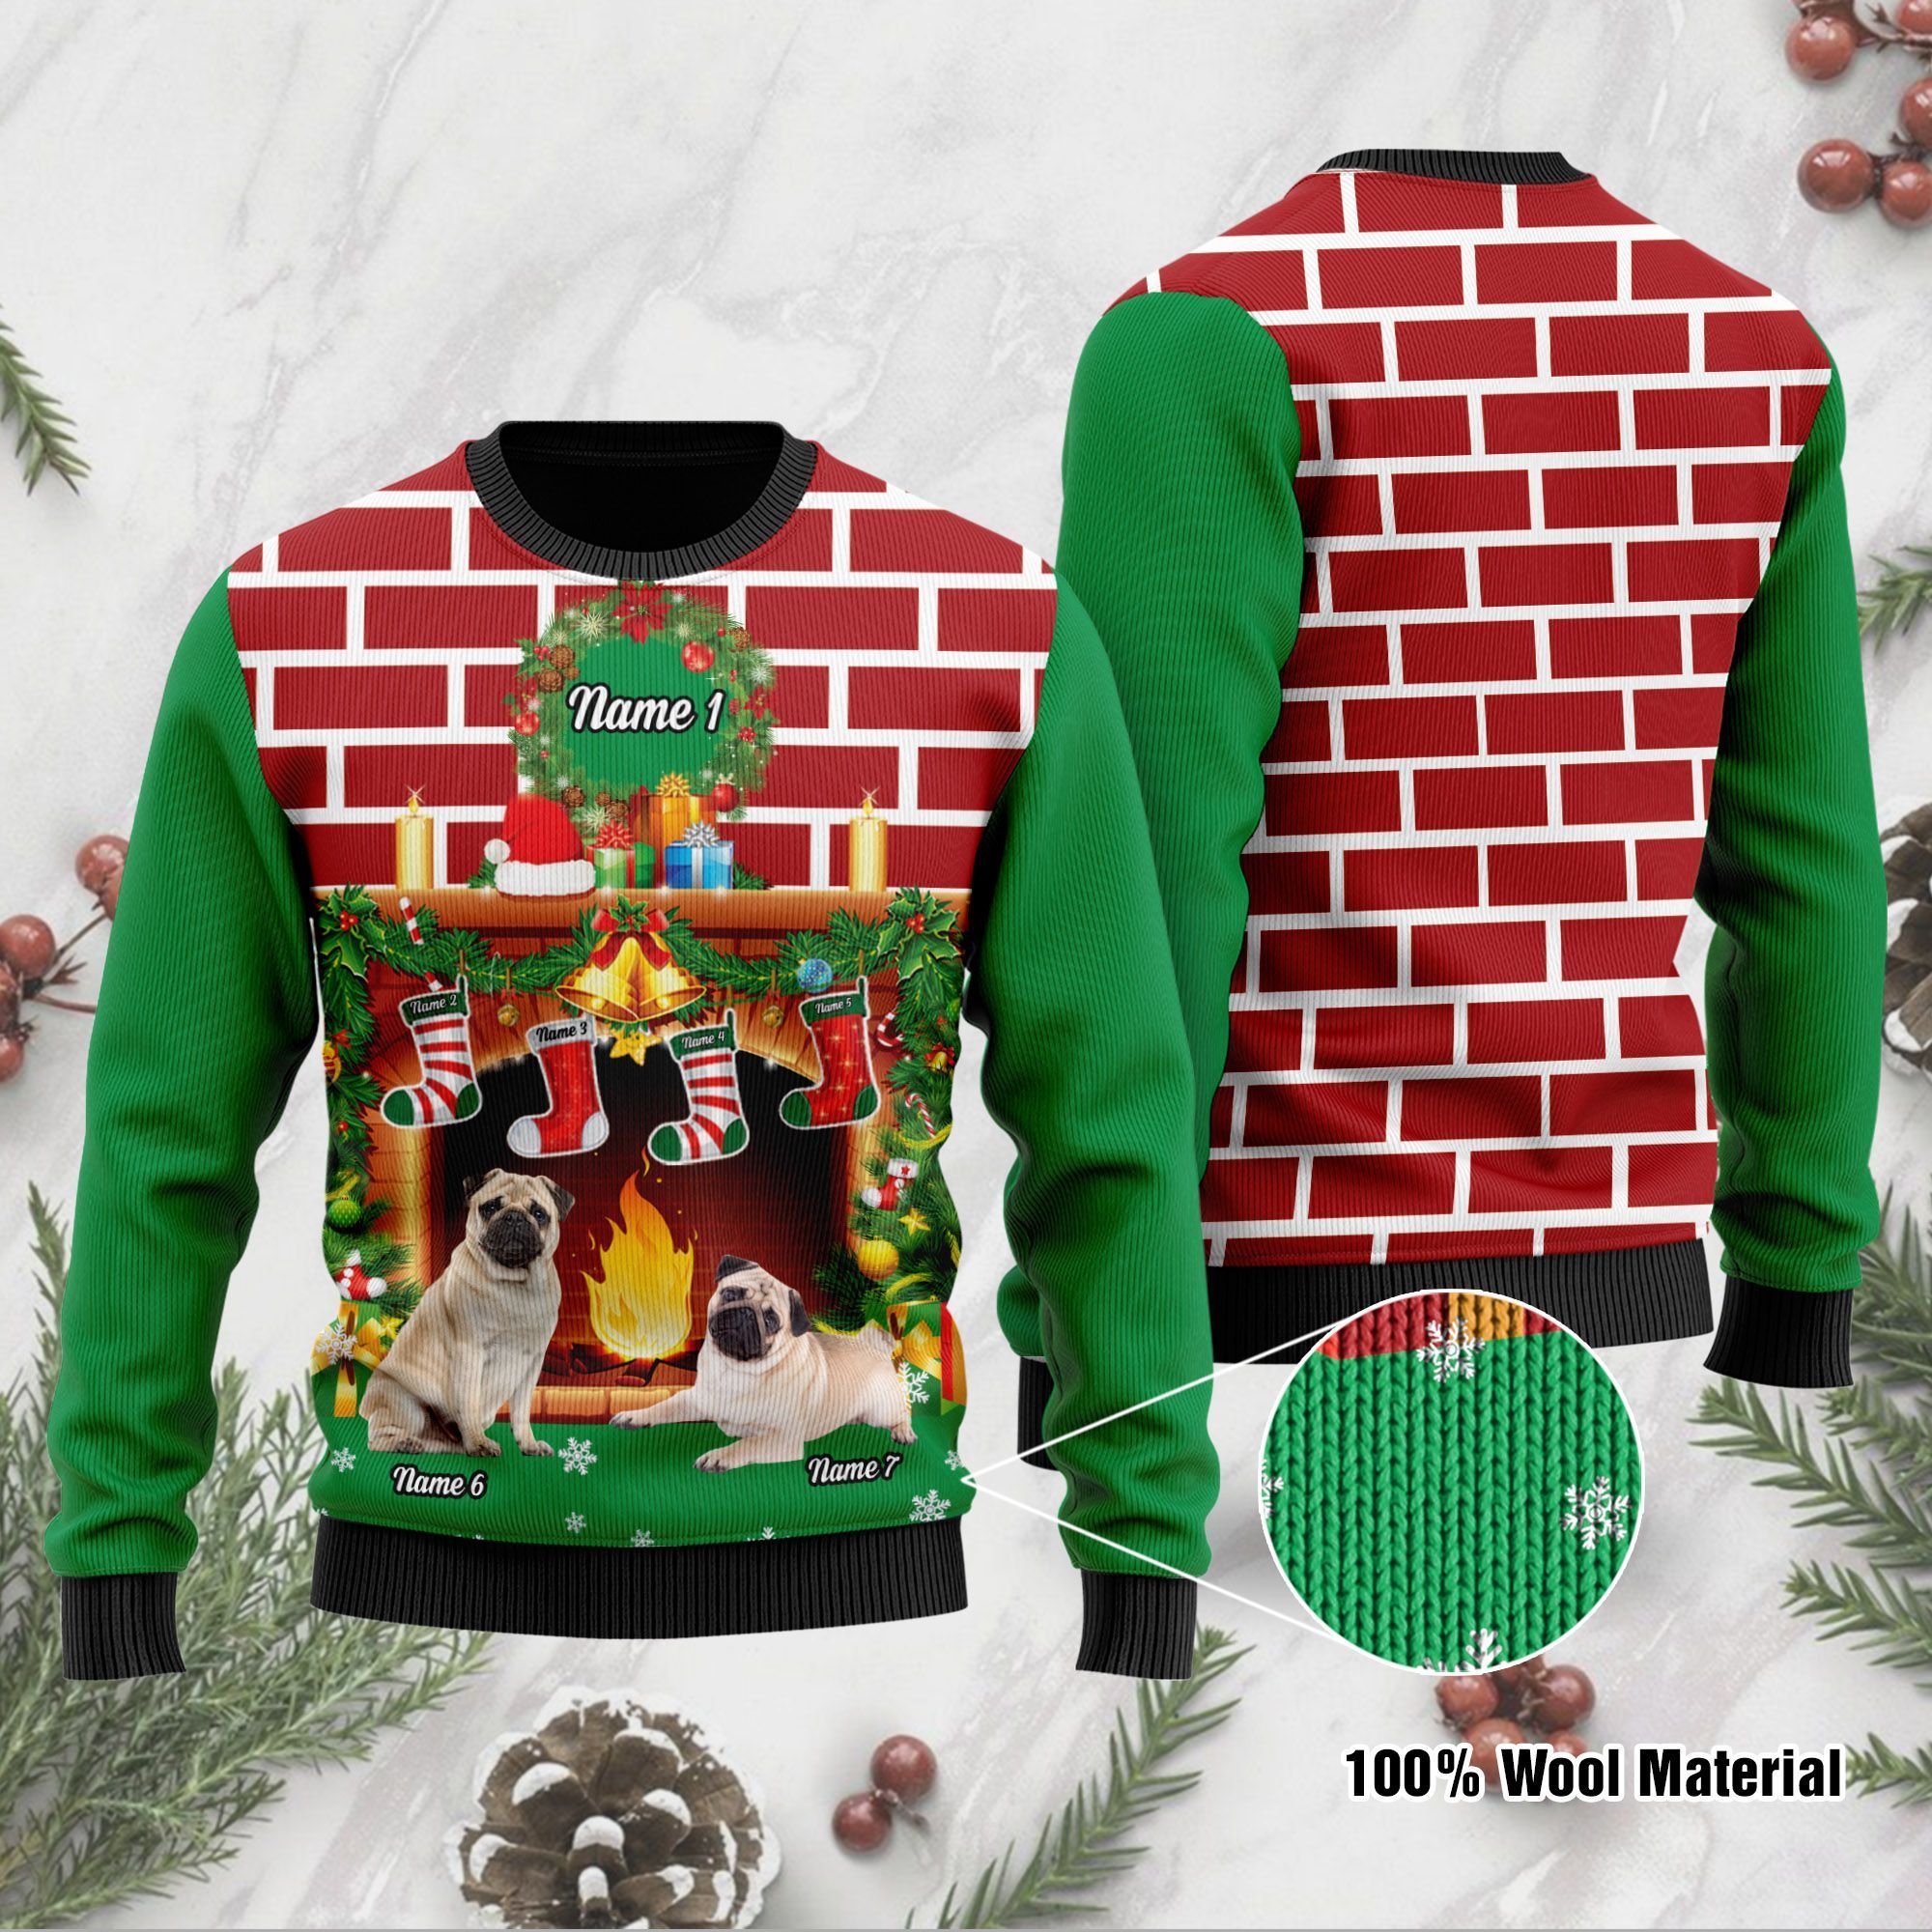 Pug Custom Ugly Sweater For Someone Who Loves Pet And Family On Christmas Time  Customize Family Names And Dog Names